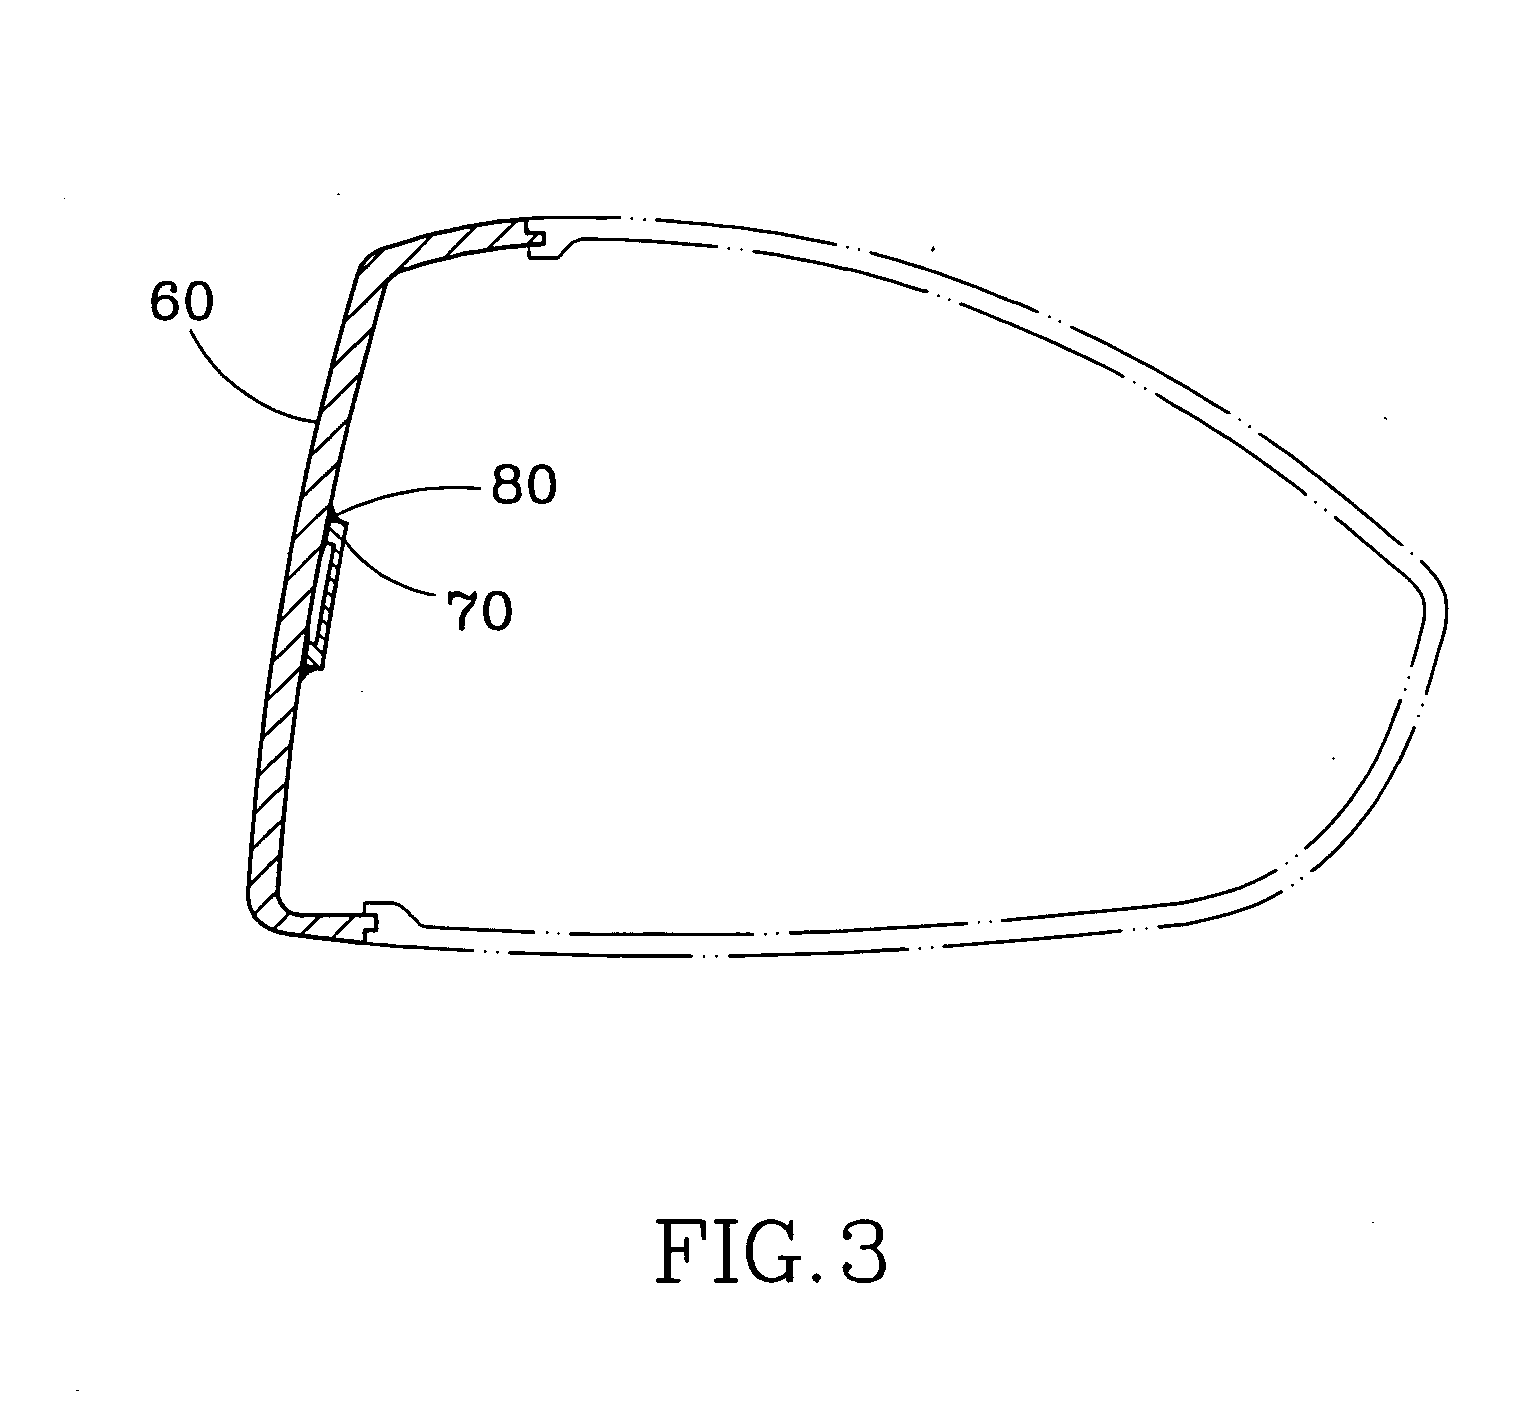 Method of adjusting coefficient of restitution of face of golf club head